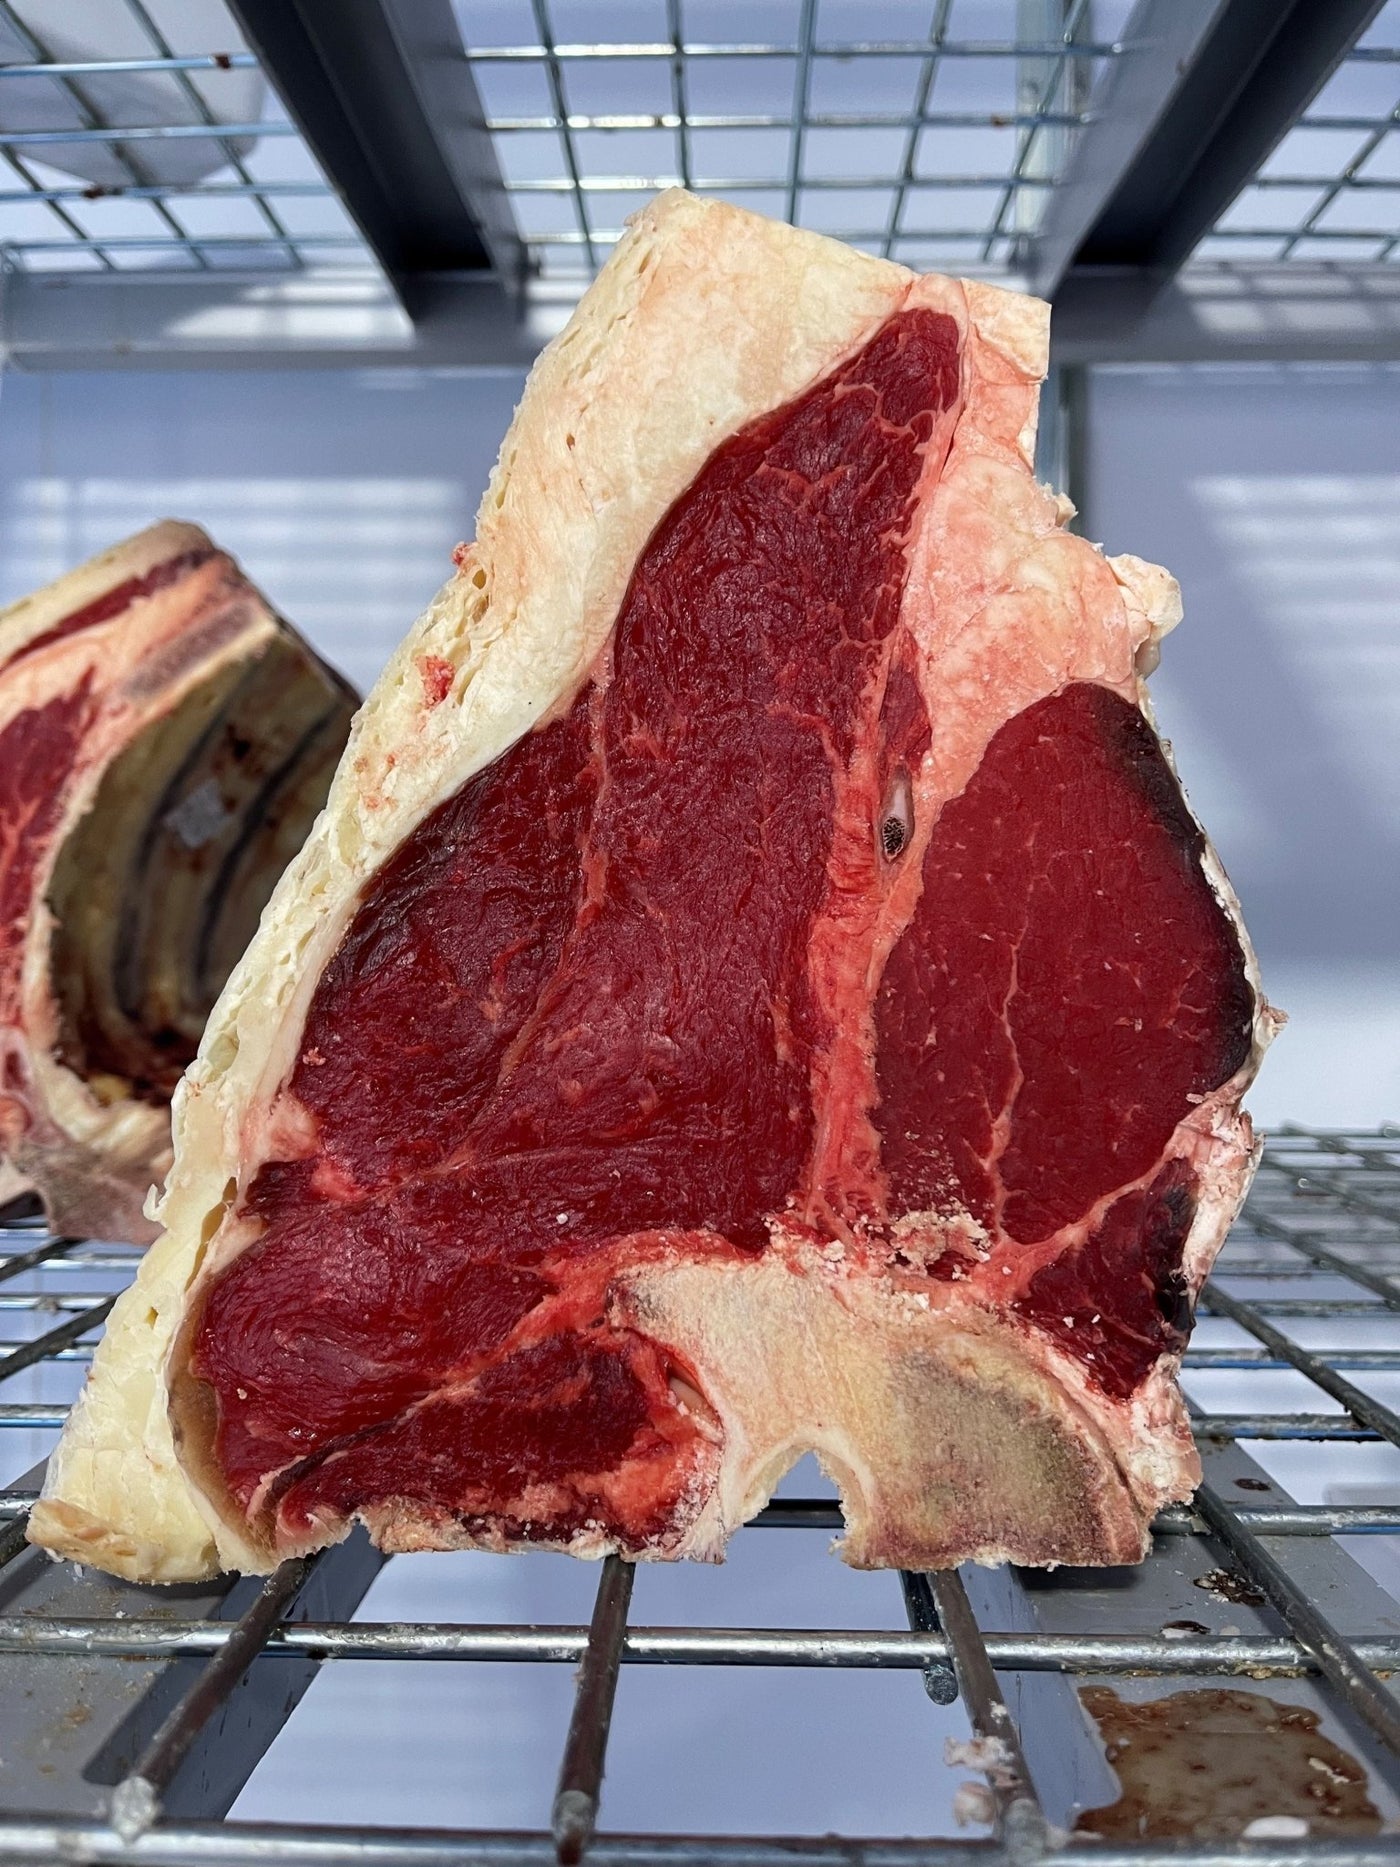 35 Day Dry-Aged Home Grown Coxtie Green Hereford - Thomas Joseph Butchery - Ethical Dry-Aged Meat The Best Steak UK Thomas Joseph Butchery